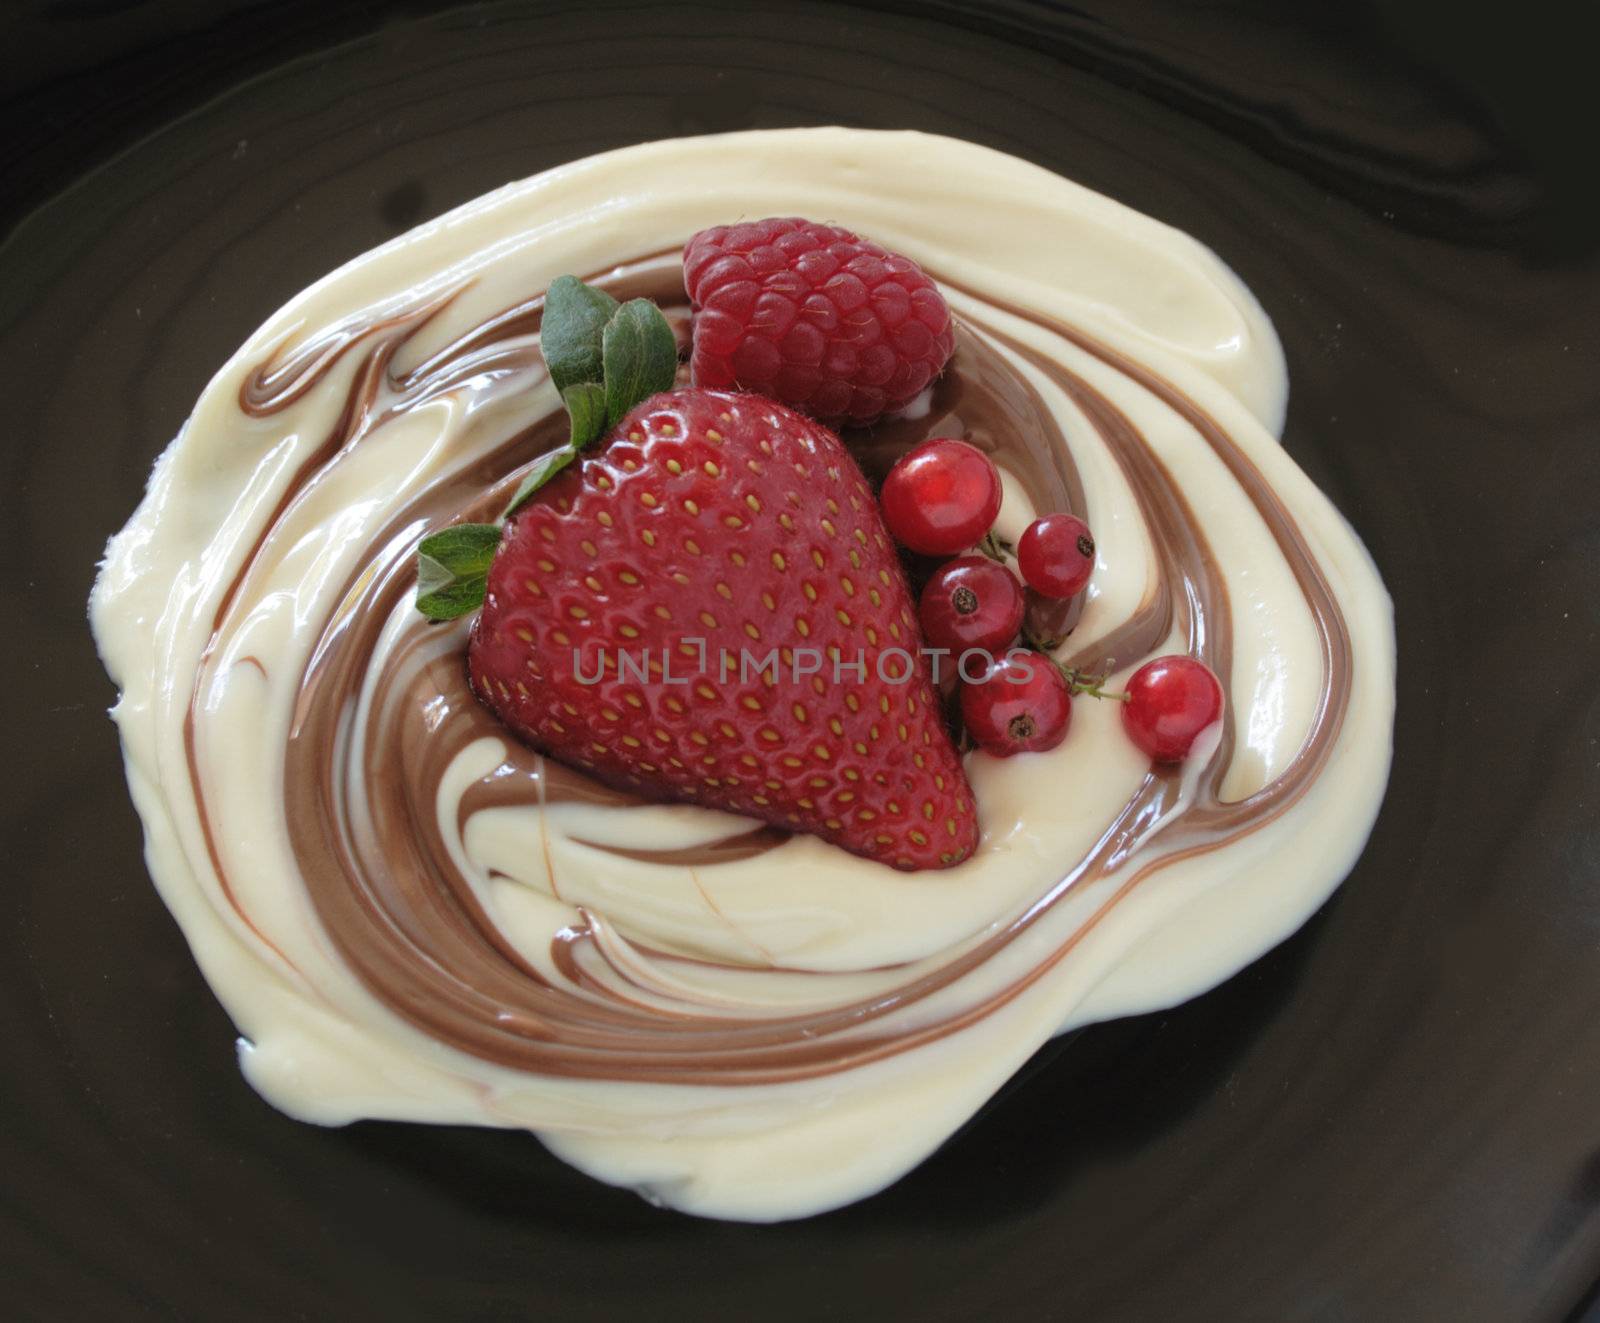 milk chocolate swirled into white chocolate topped with fresh berries and currants